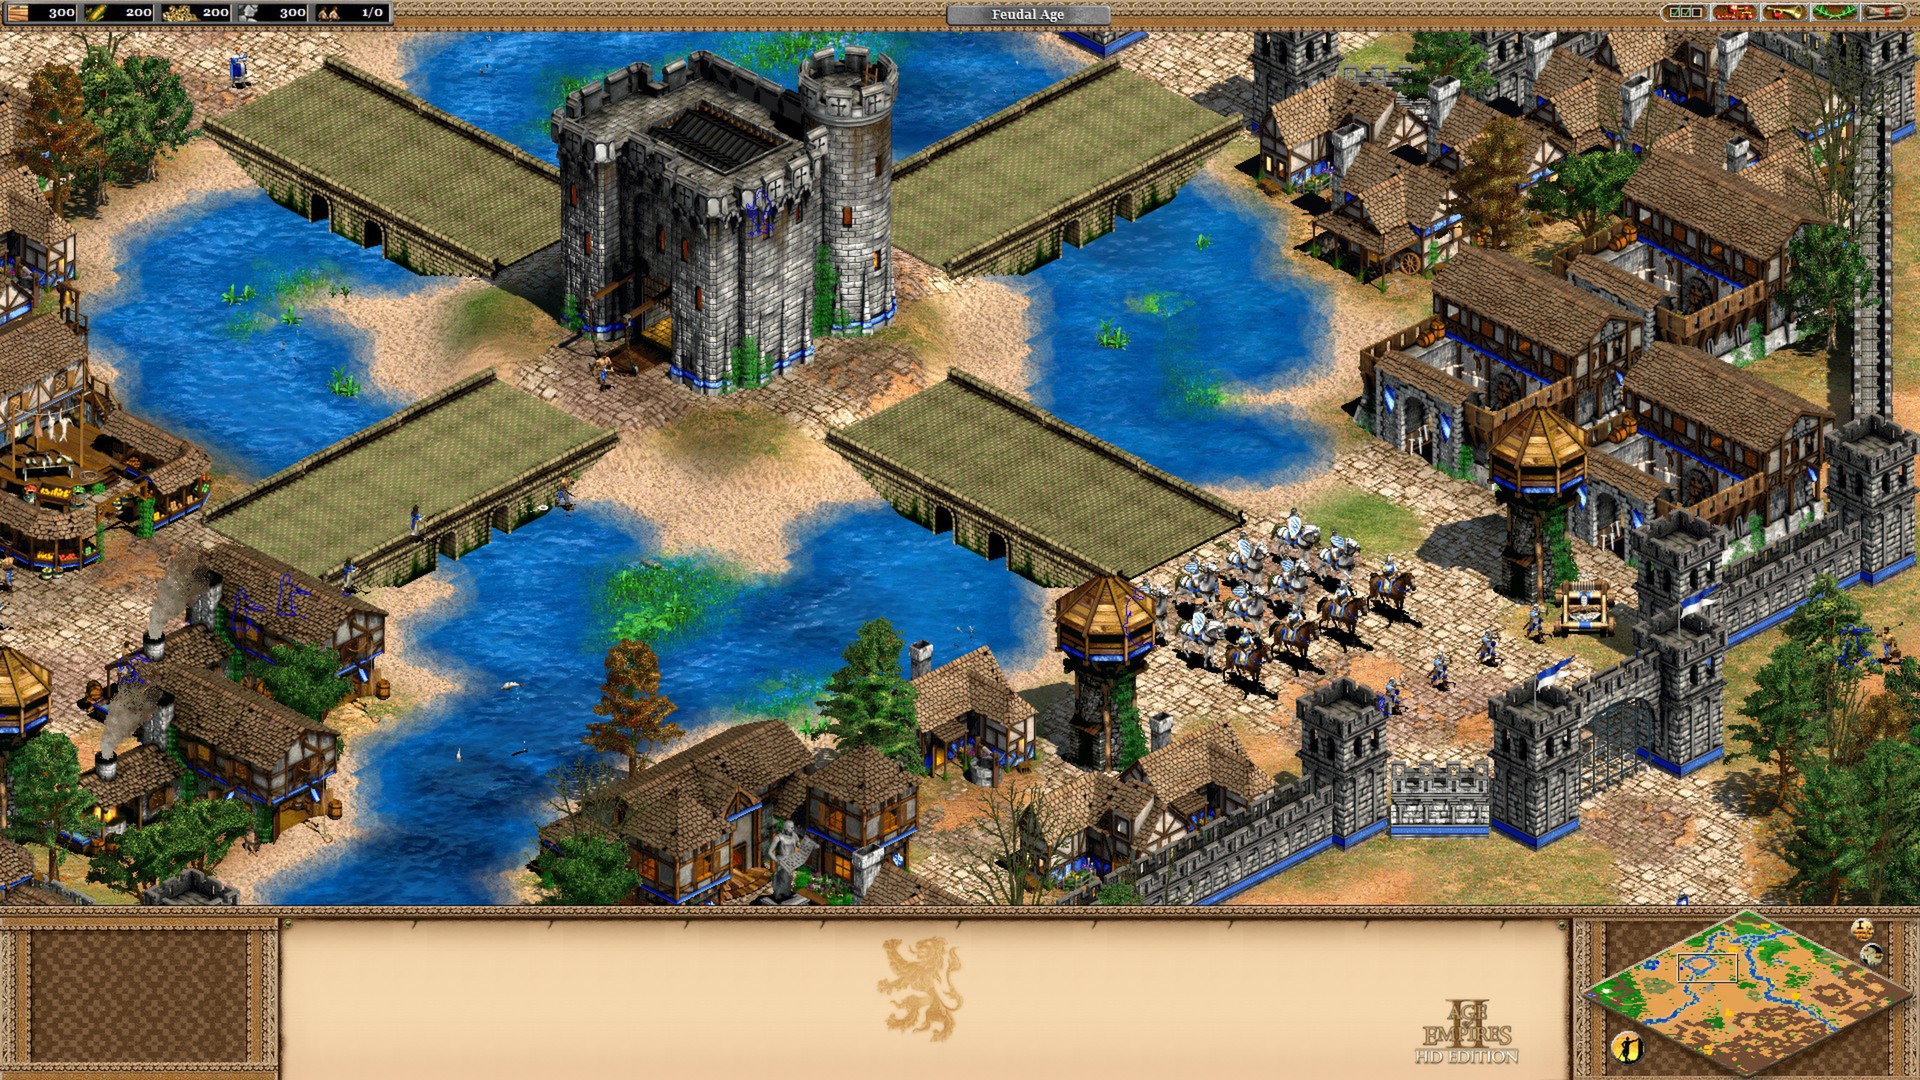 HQ Age Of Empires II: The Age Of Kings Wallpapers | File 895.93Kb